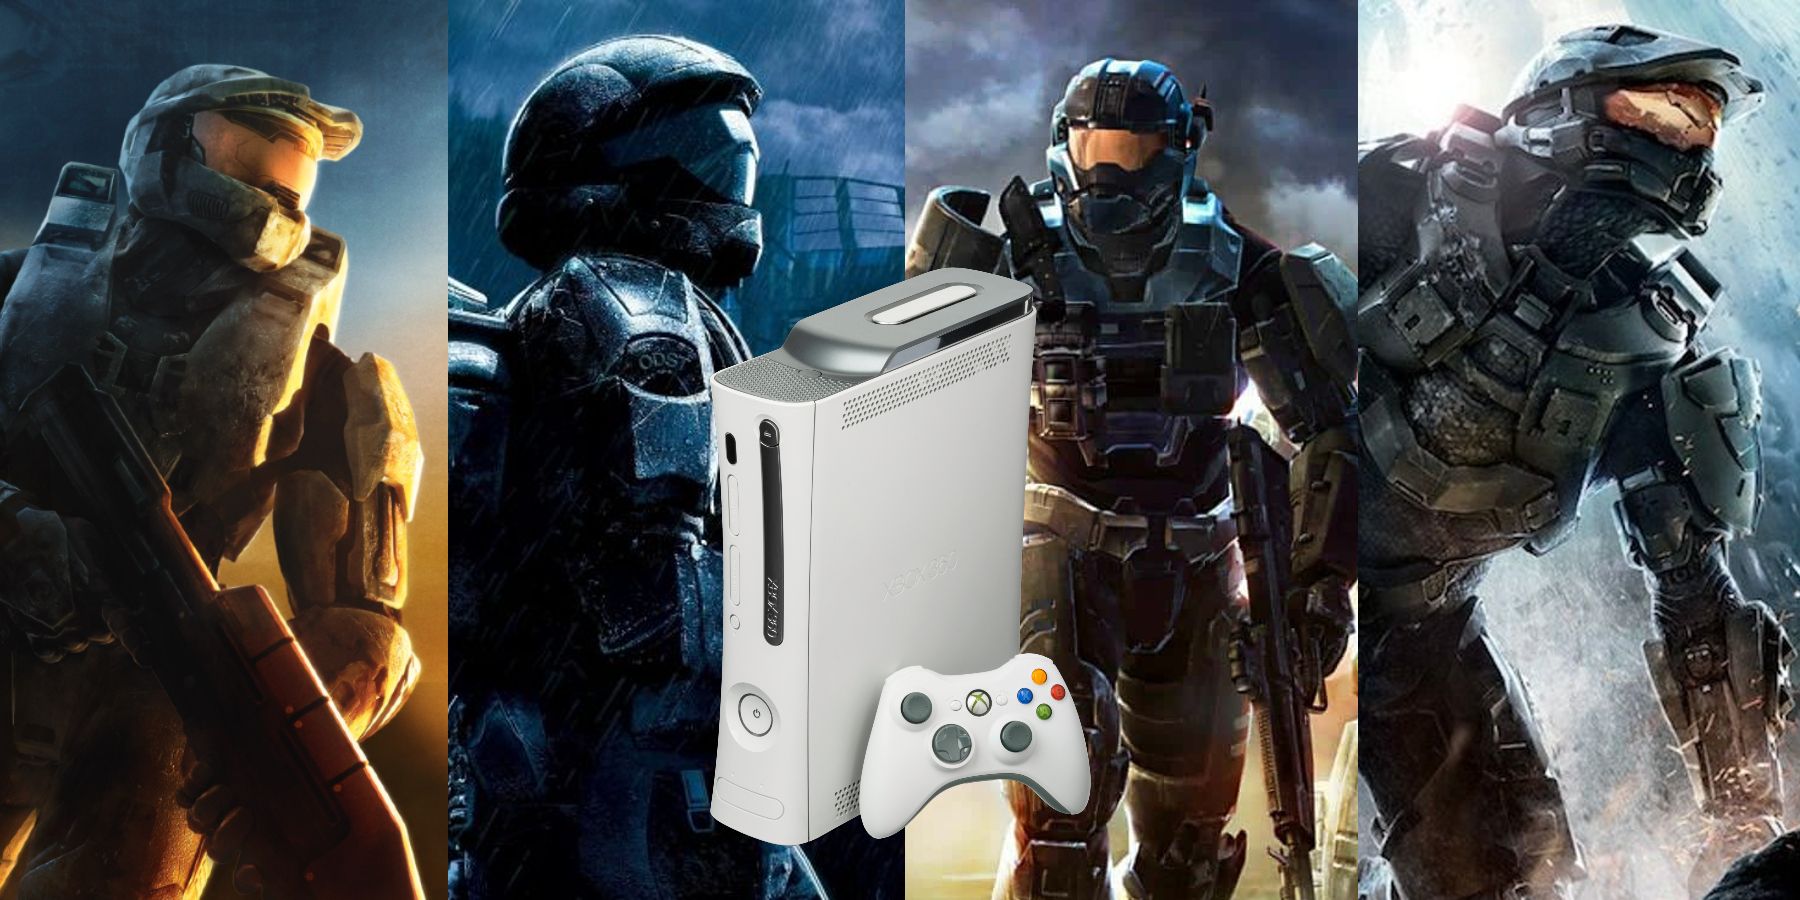 halo 3 odst reach 4 wars with console overlay